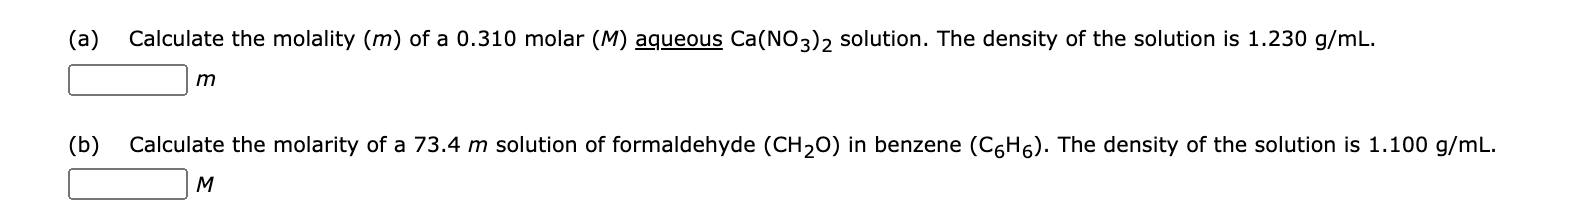 (a)
Calculate the molality (m) of a 0.310 molar (M) aqueous Ca(NO3)2 solution. The density of the solution is 1.230 g/mL.
(b)
Calculate the molarity of a 73.4 m solution of formaldehyde (CH20) in benzene (C6H6). The density of the solution is 1.100 g/mL.
M
